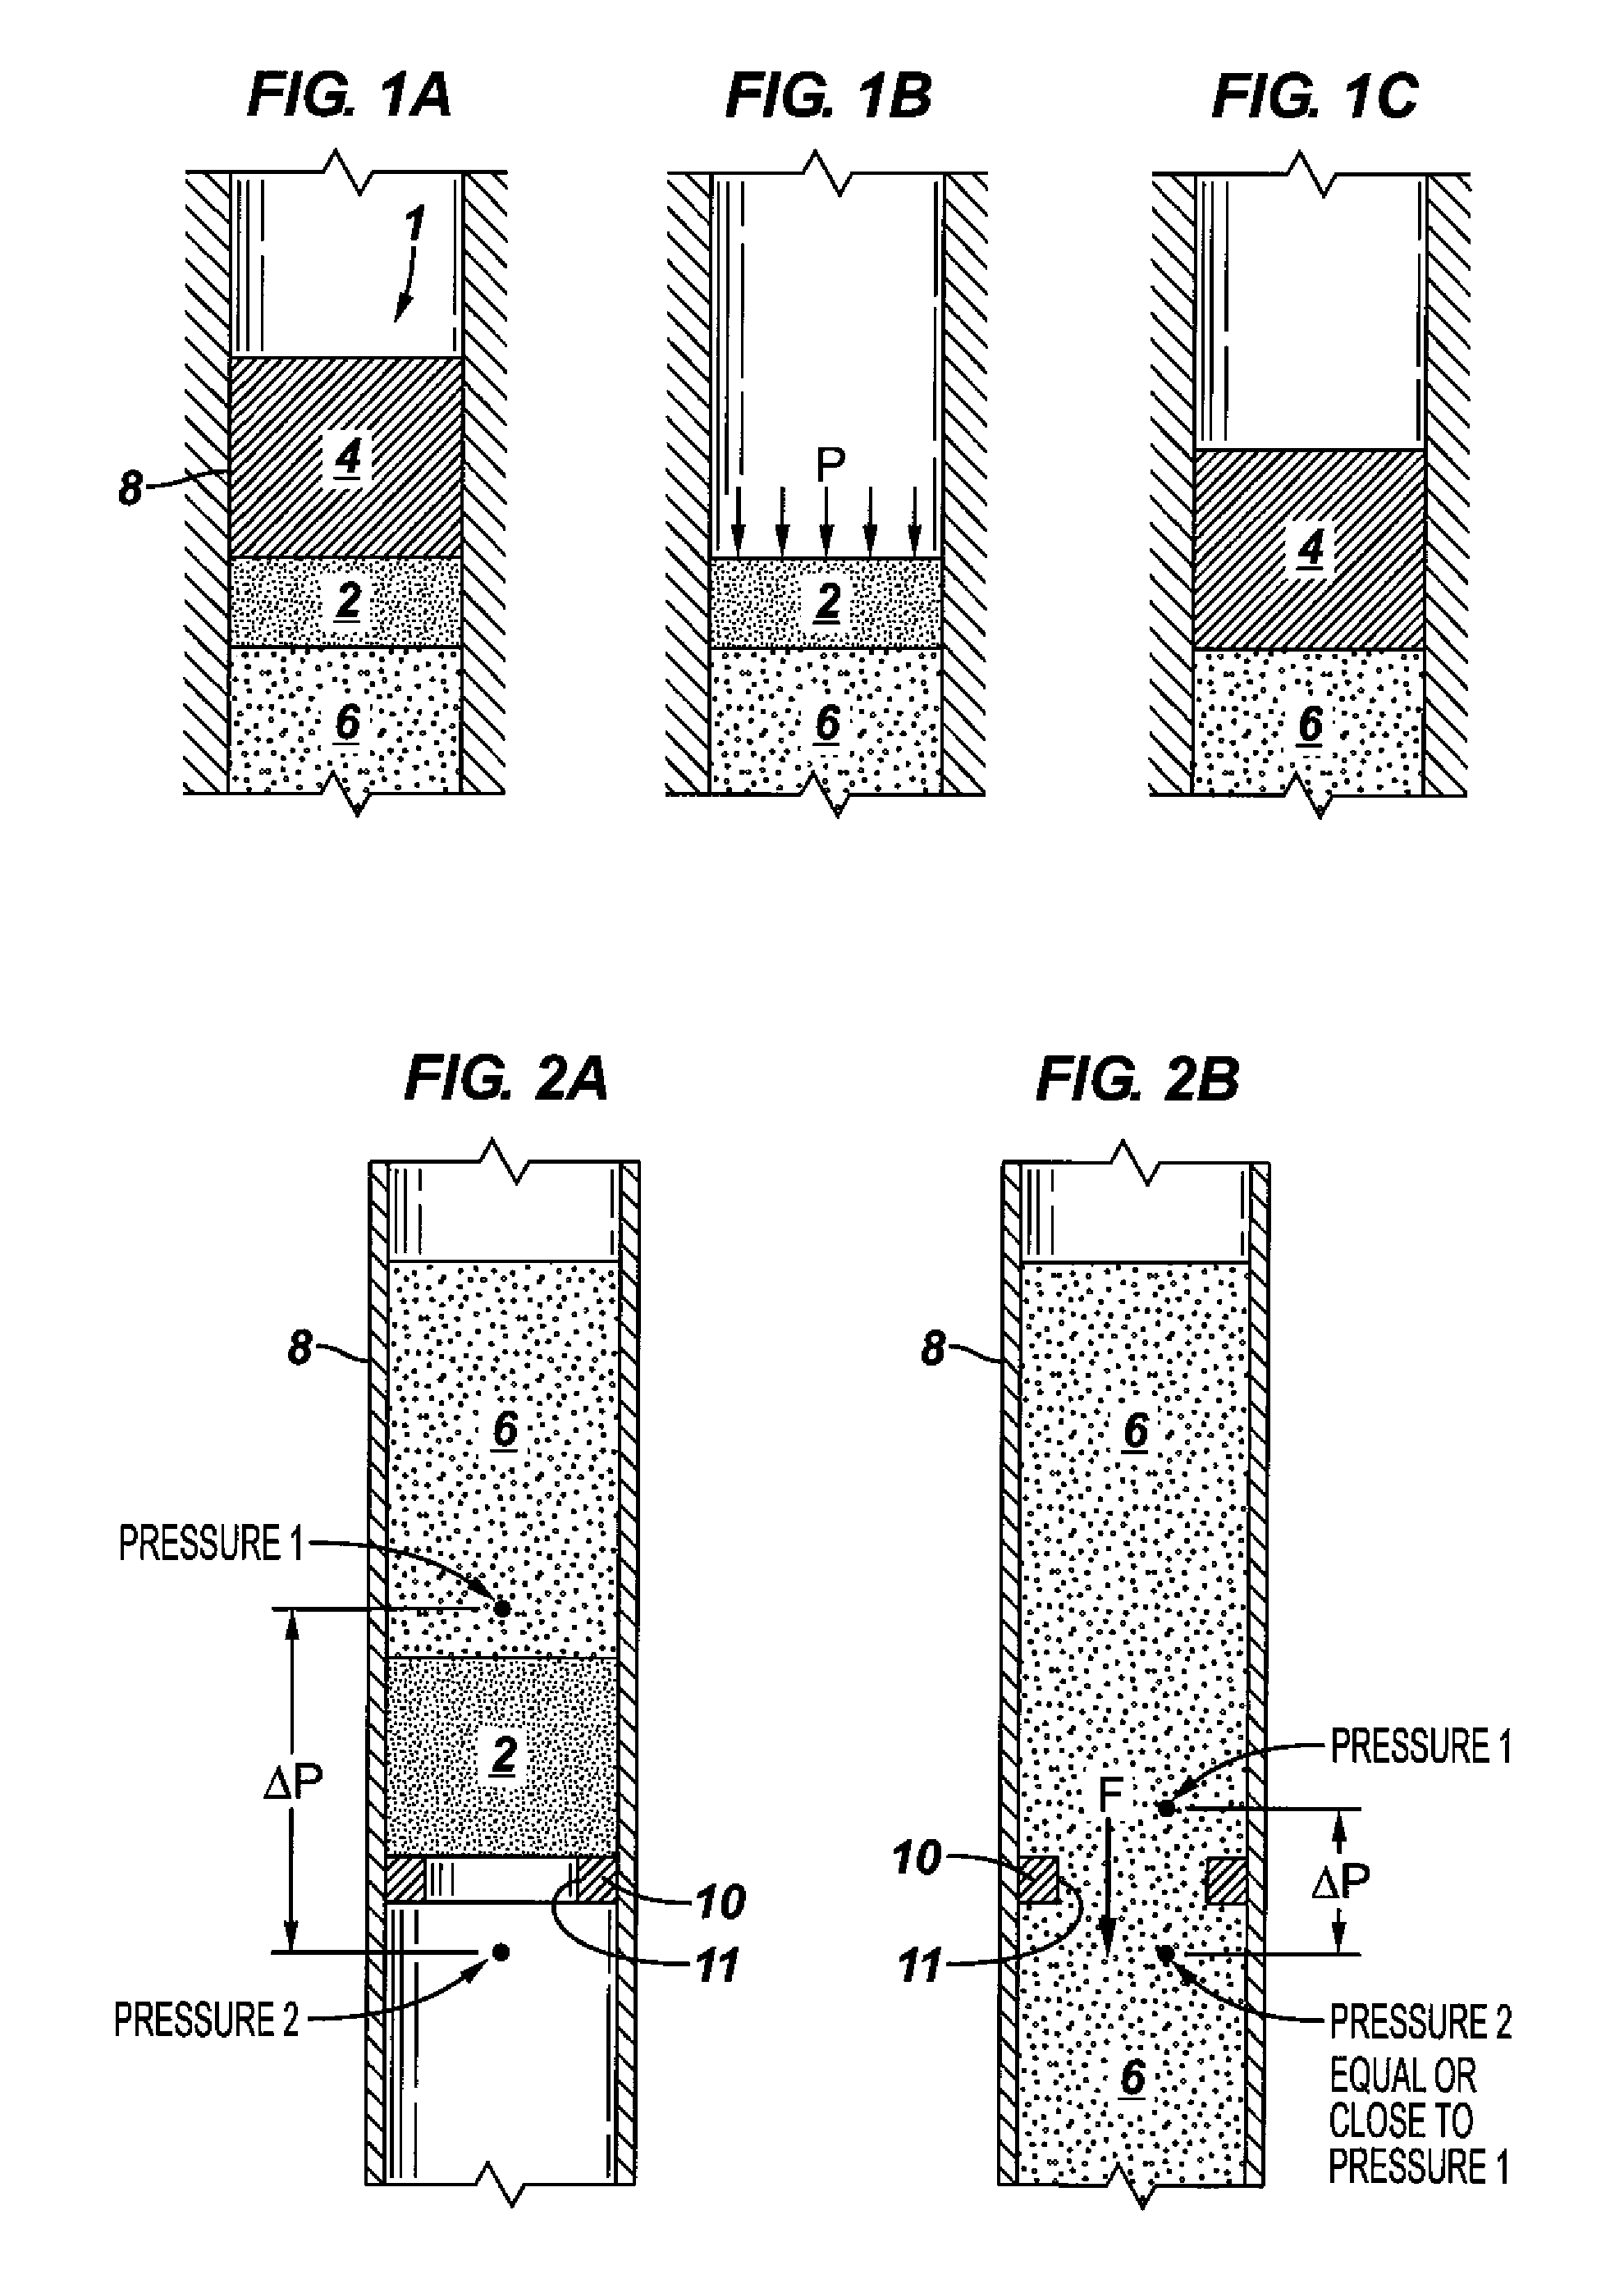 Degradable compositions, apparatus comprising same, and method of use